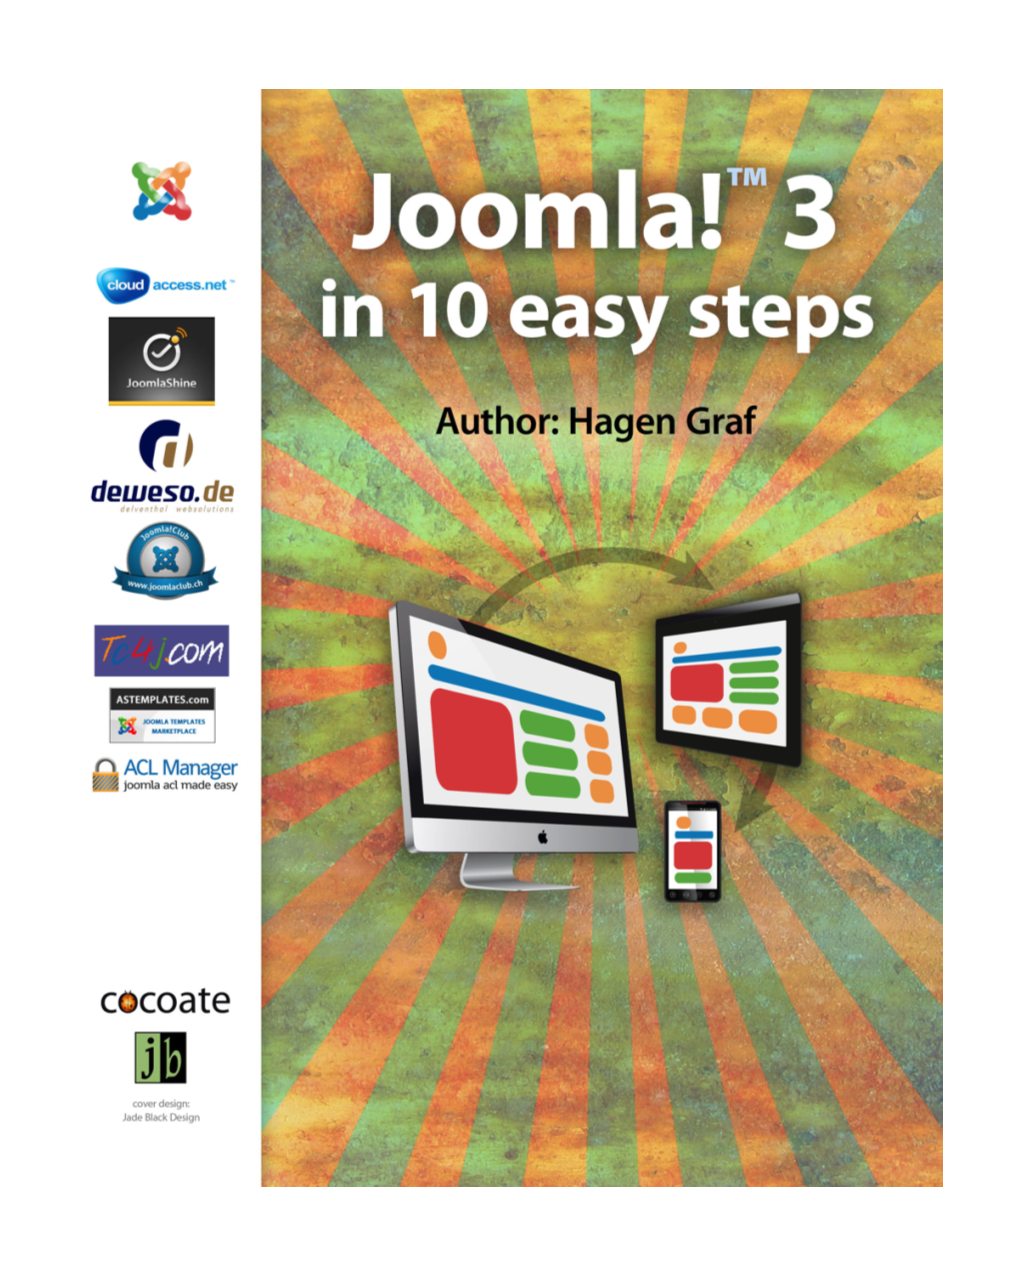 Joomla! 3 in 10 Easy Steps the New Joomla! 3.X Series Is Mobile Ready and Comes with a Complete New User Interface